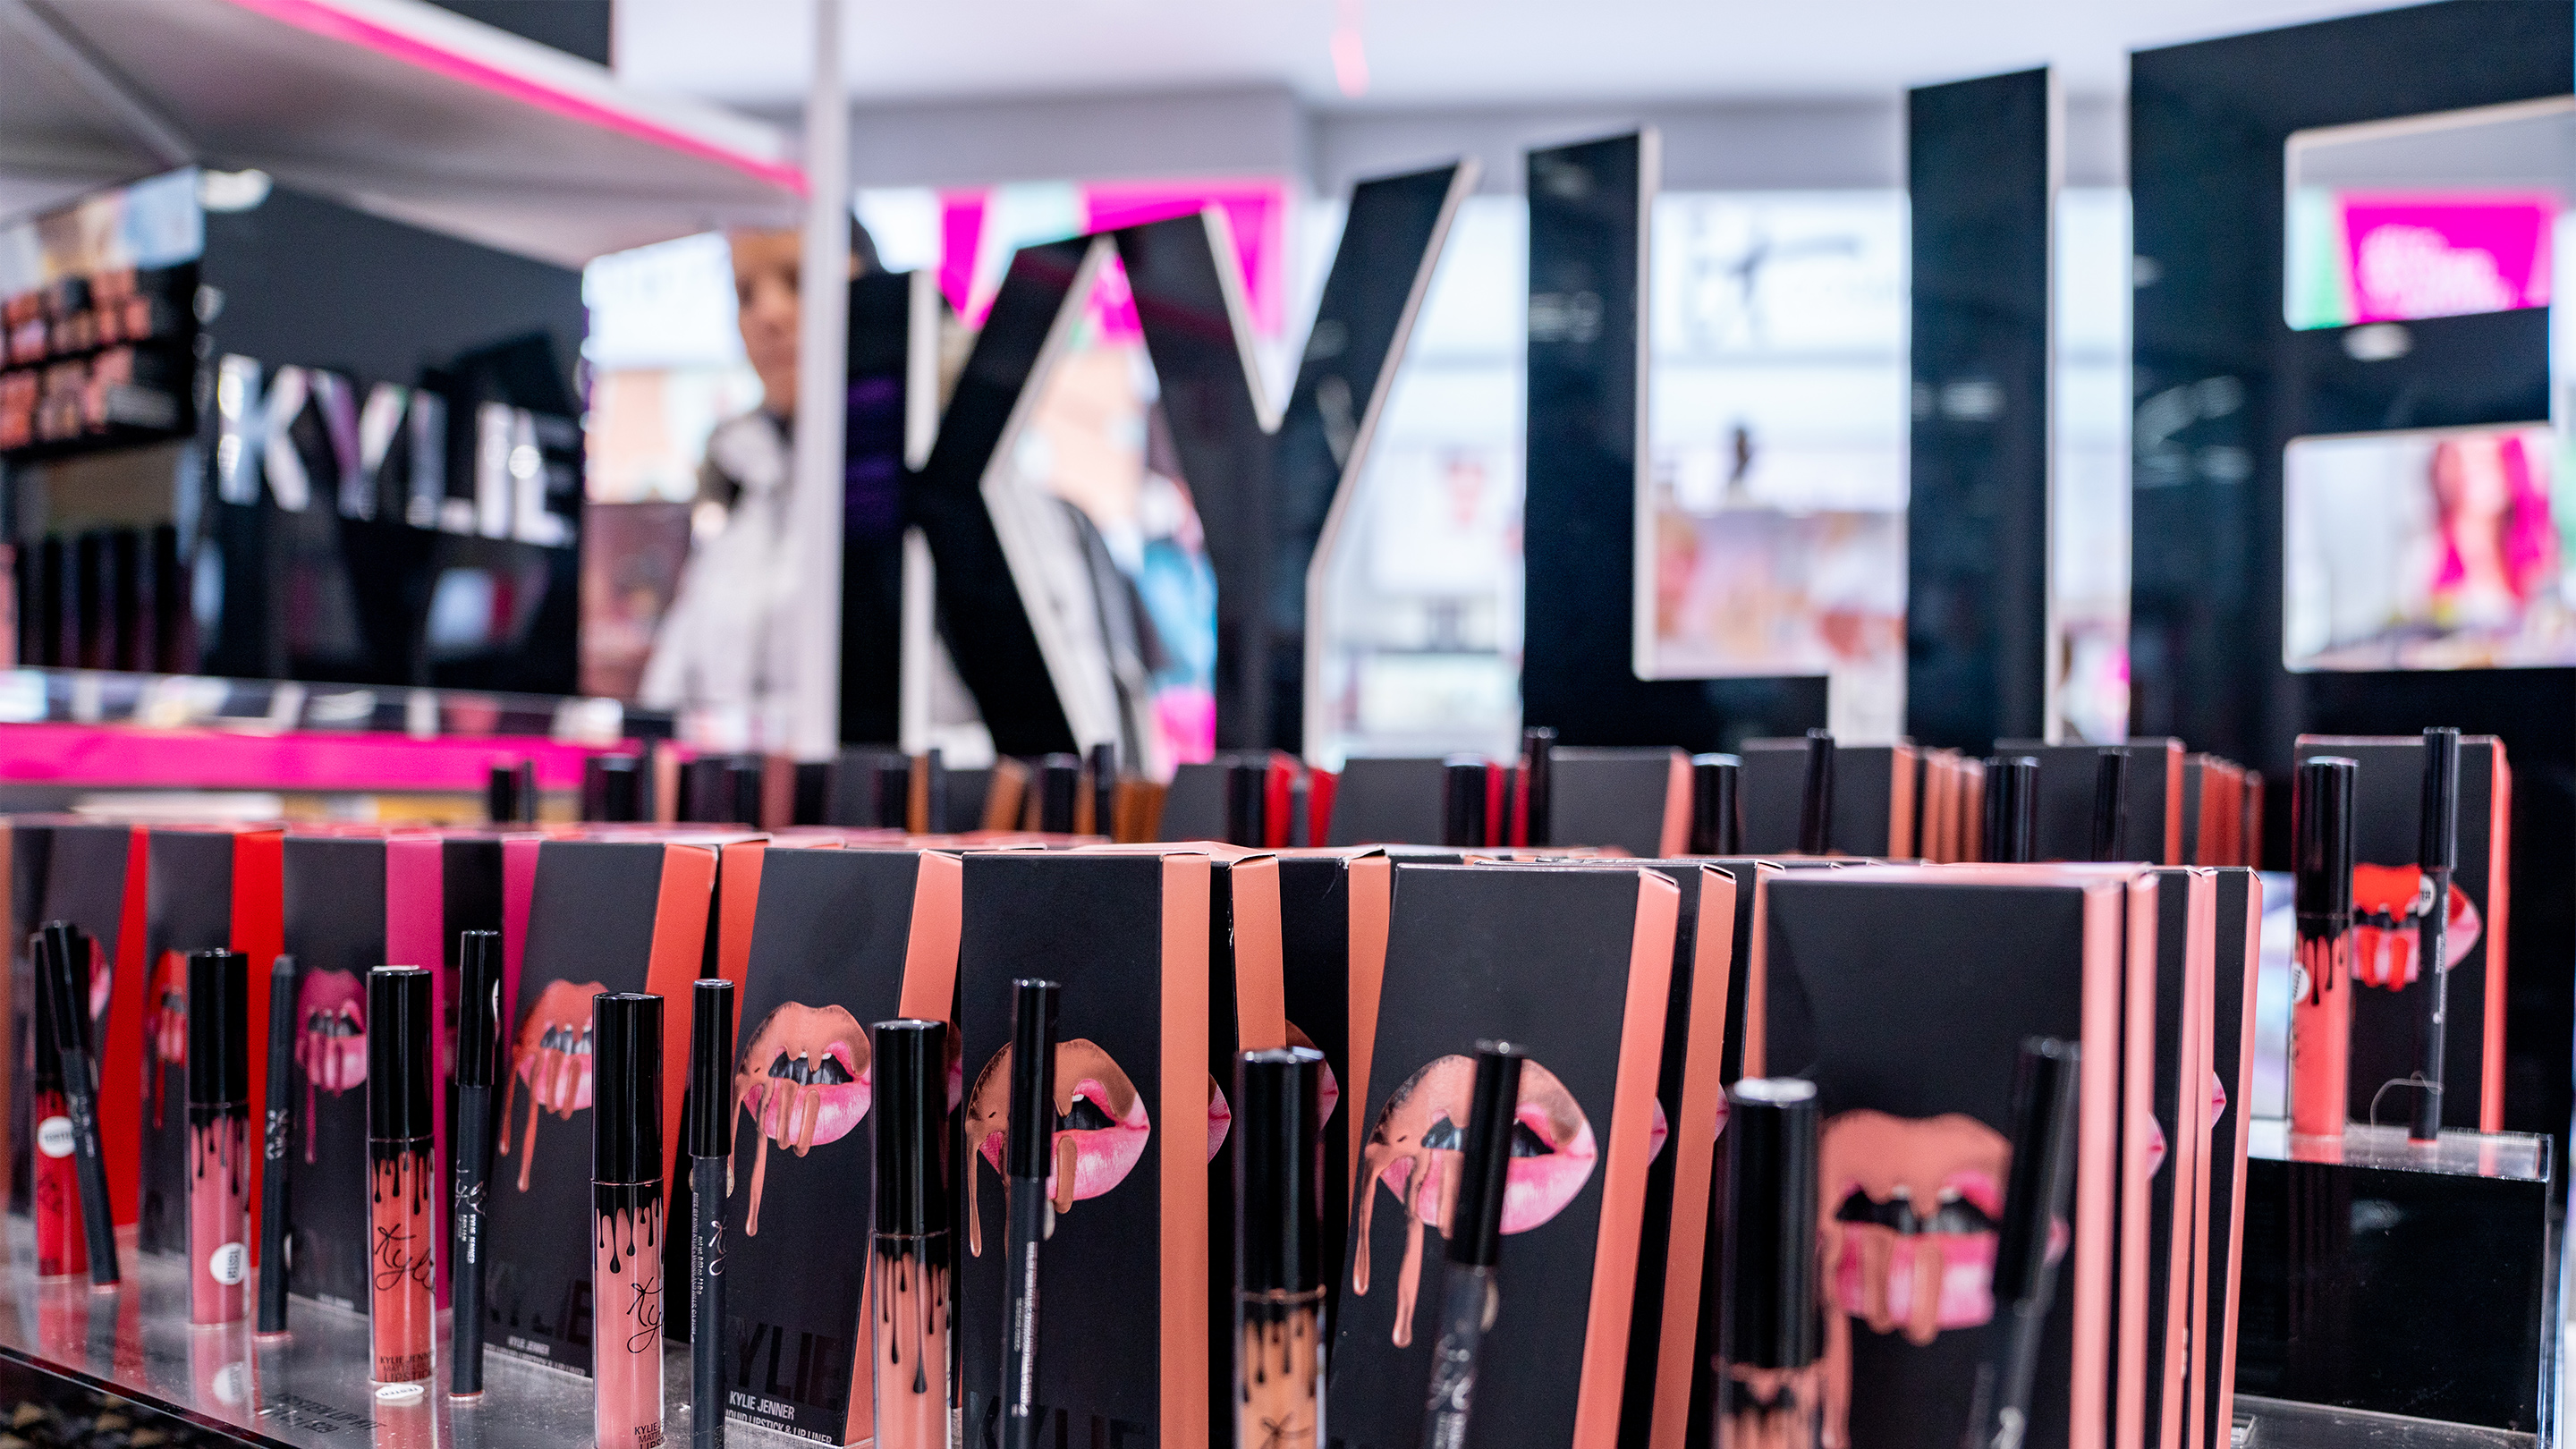 With an eye on social media, Coty takes a majority stake in Kylie Cosmetics  - Marketplace